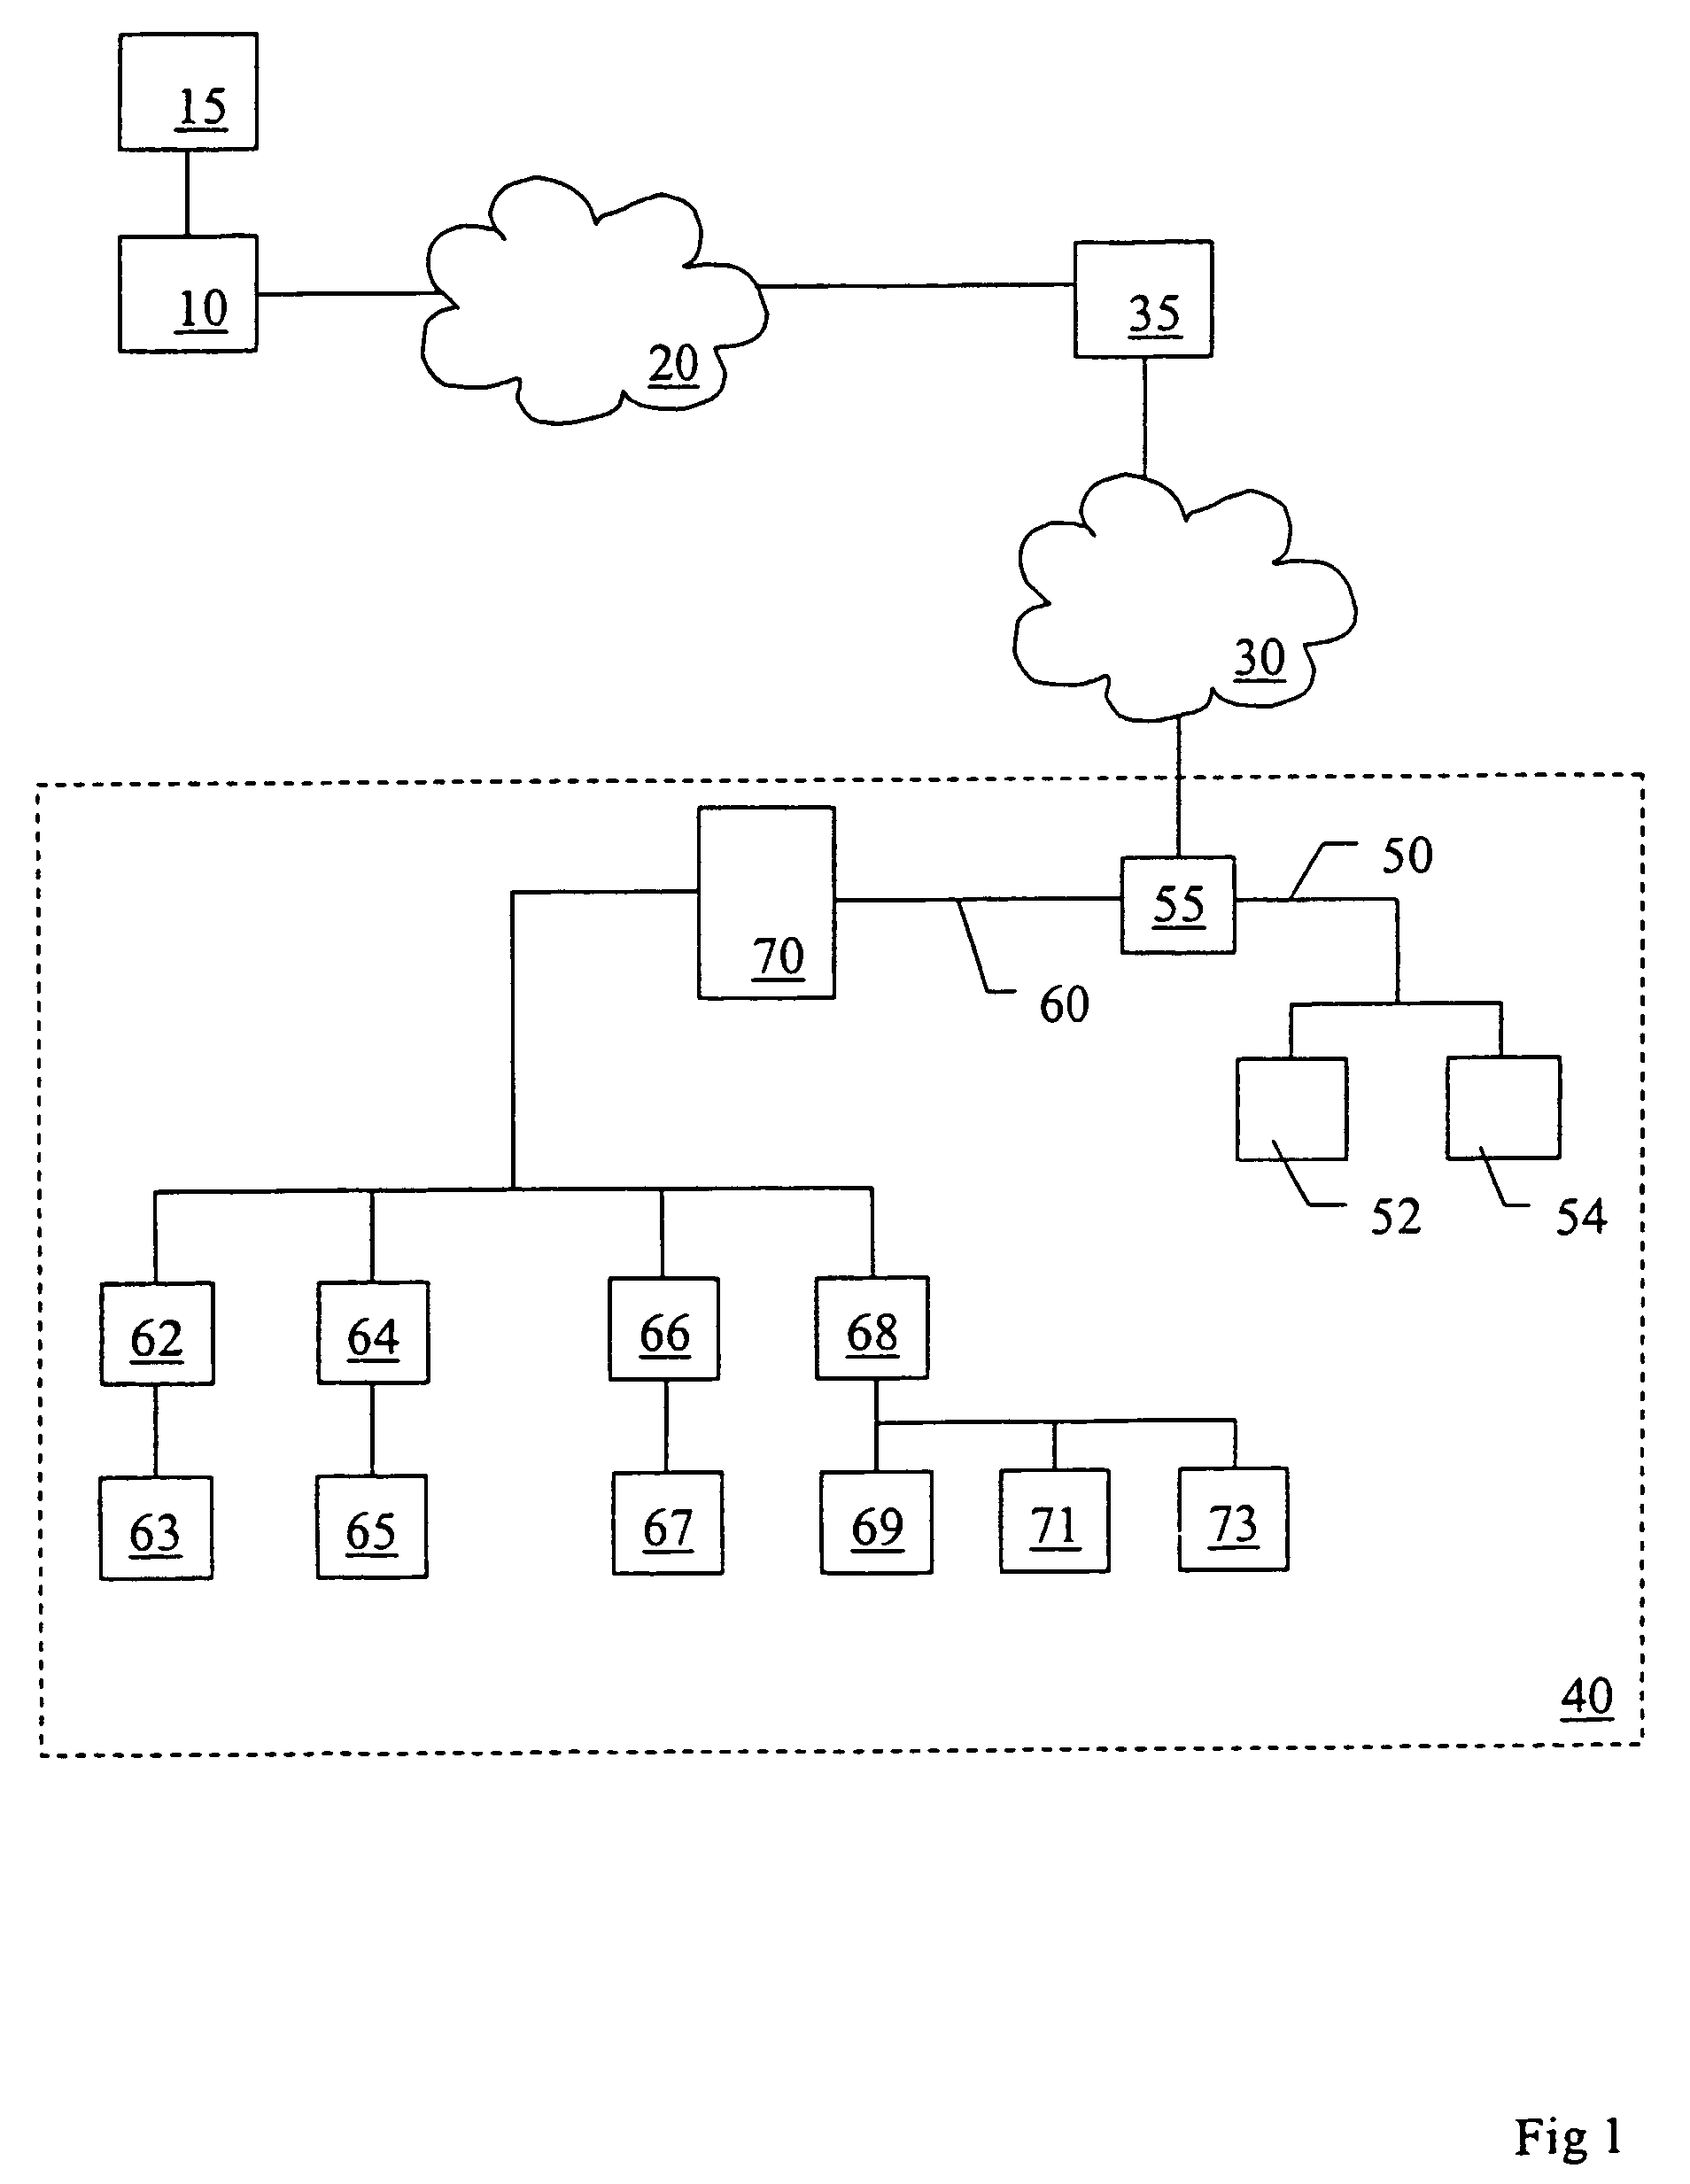 Method and system for control and maintenance of residential service networks